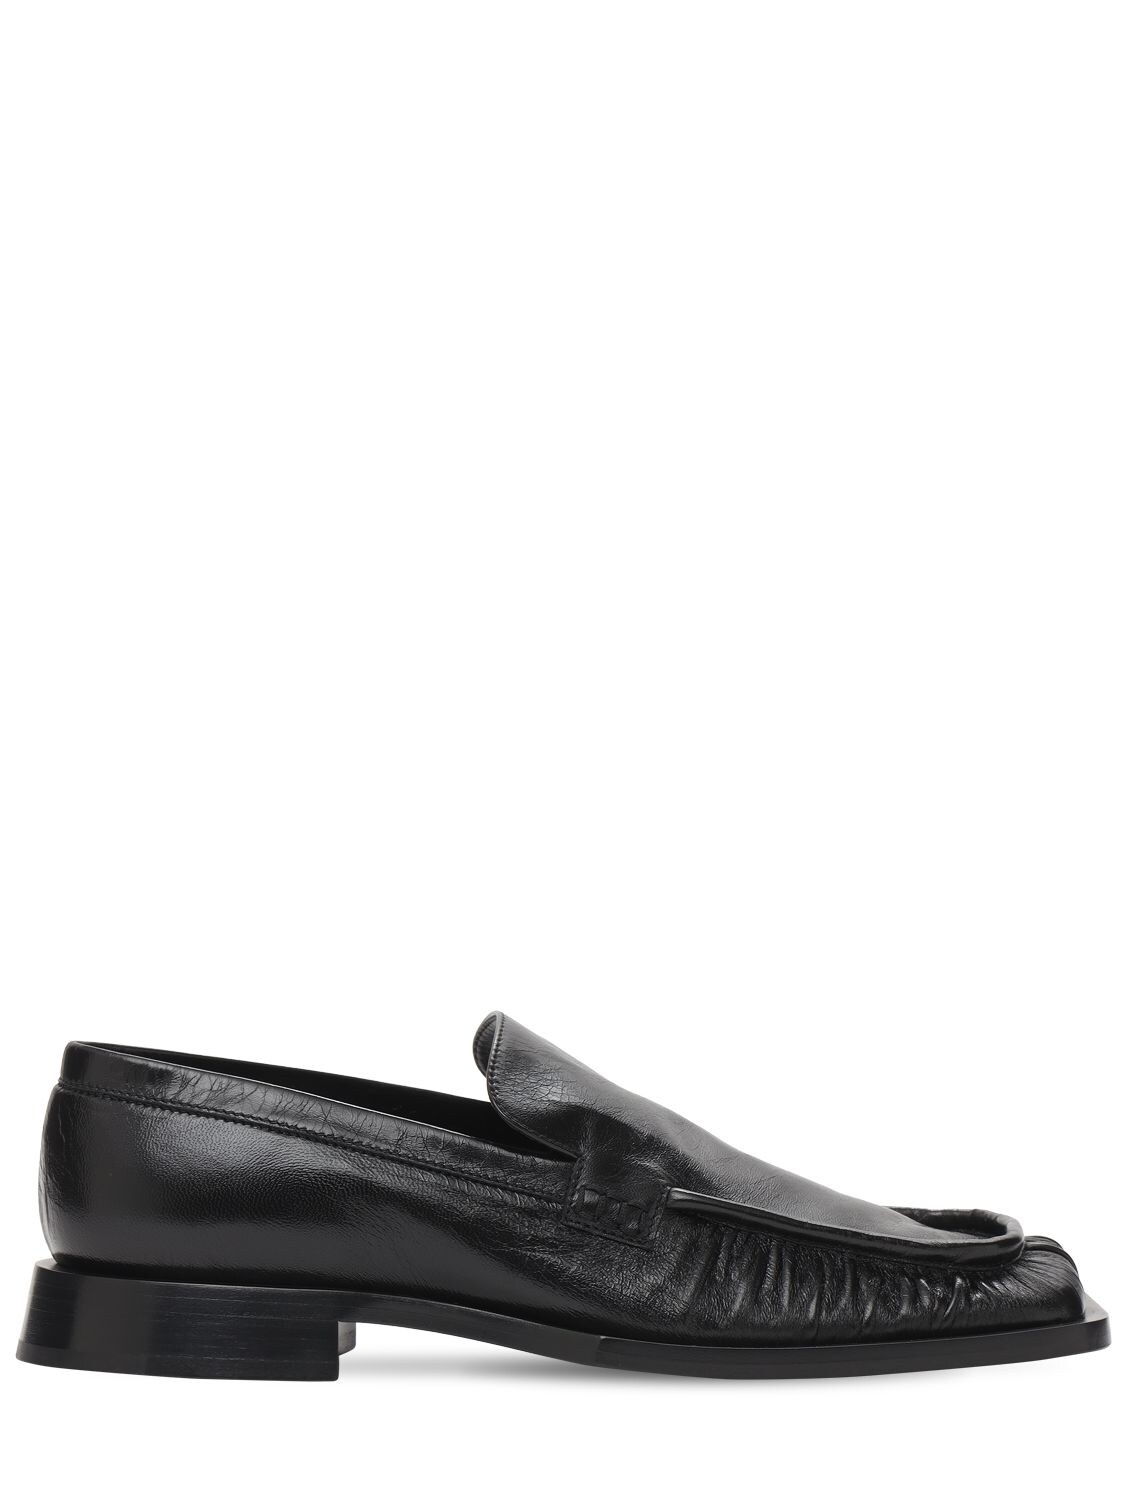 Jil Sander Leathers 20MM LEATHER LOAFERS